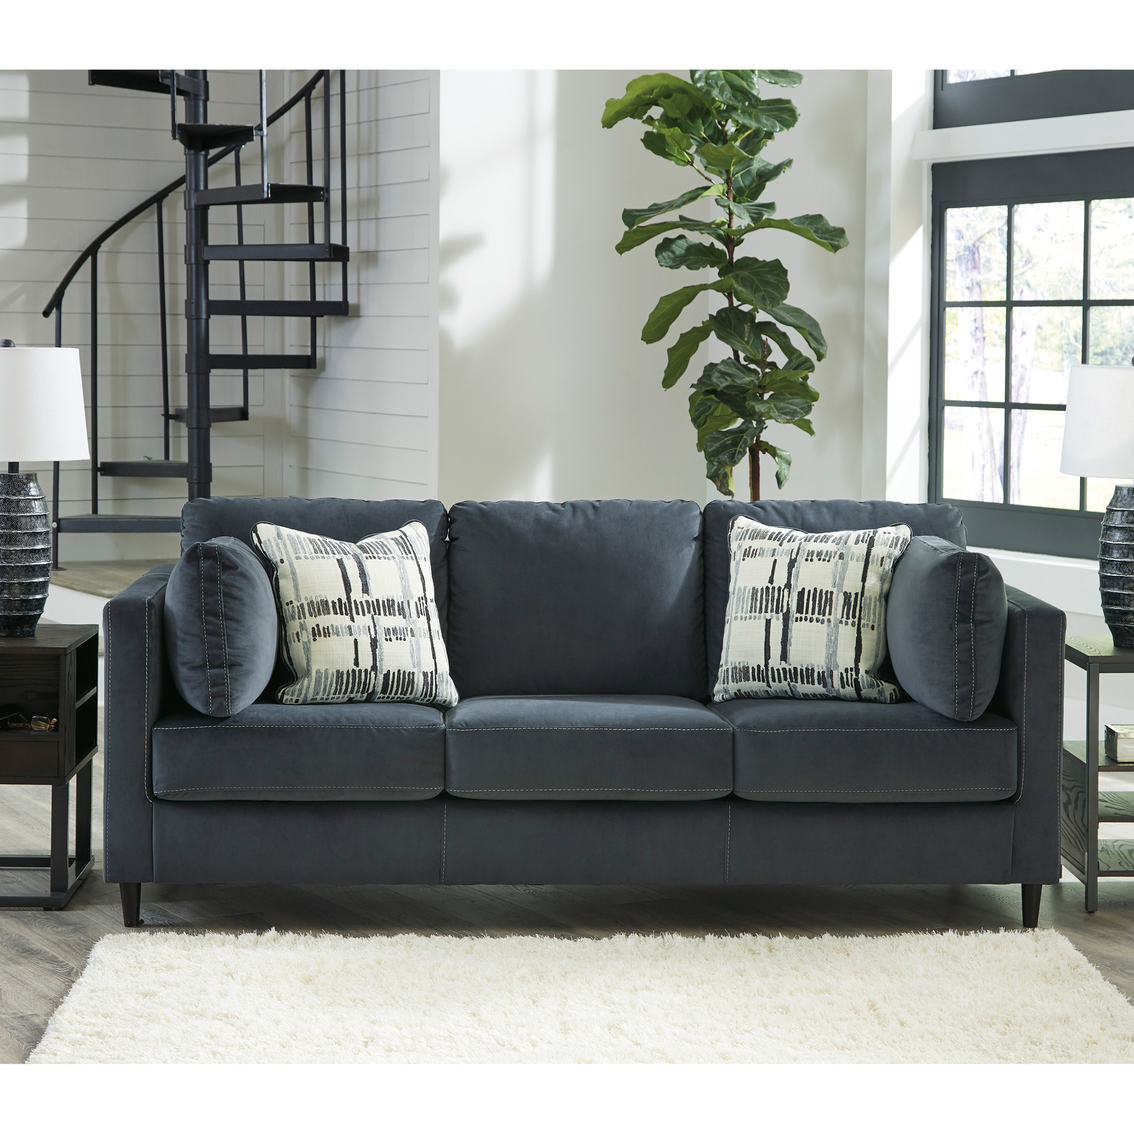 Signature Design By Ashley Kennewick Sofa | Sofas & Couches | Furniture